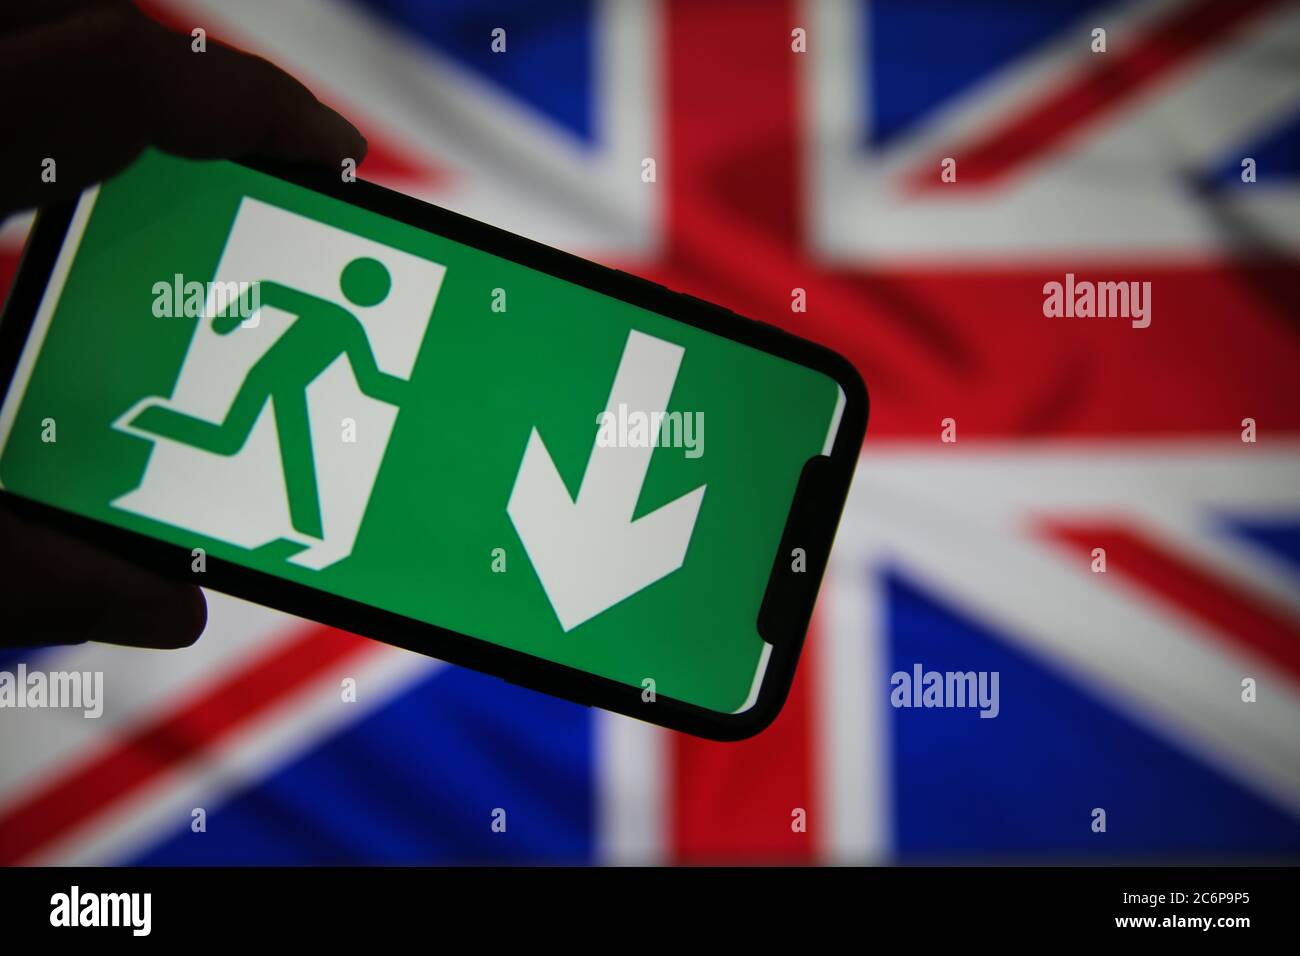 Viersen, Germany - July 9. 2020: View on isolated mobile phone screen with green emergency evacuation exit sign. Blurred union jack background. Stock Photo